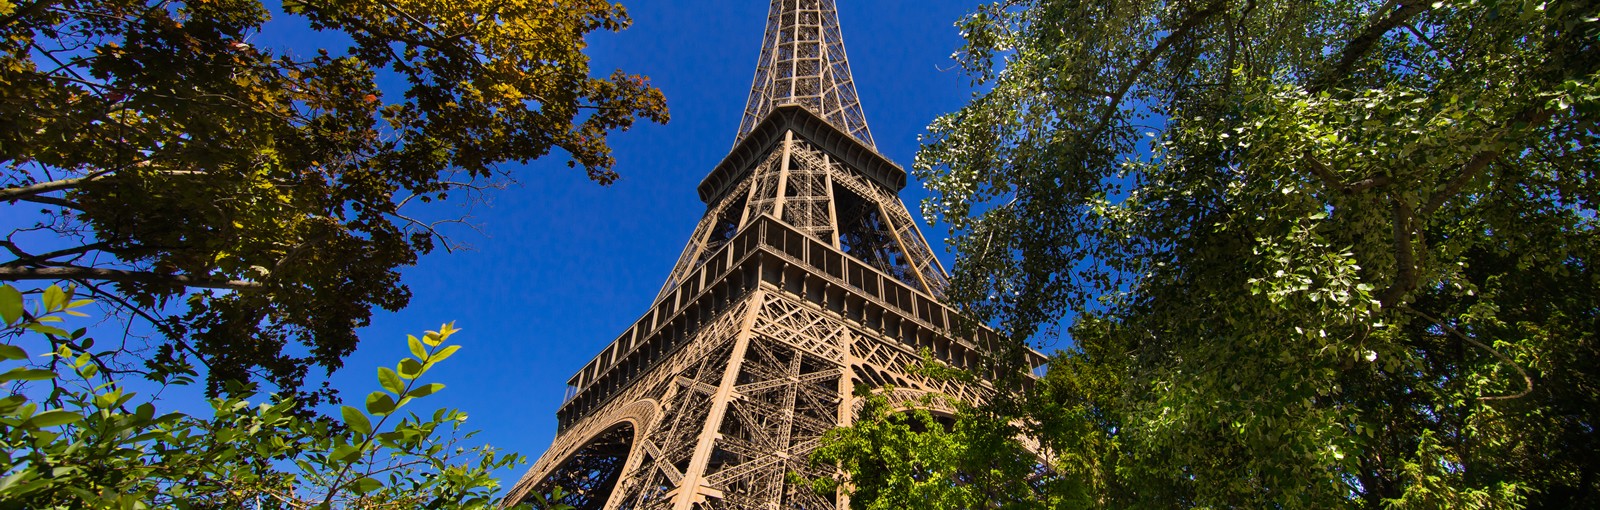 Tours Short stay with 4 hotel nights - Paris Packages - Paris Tours